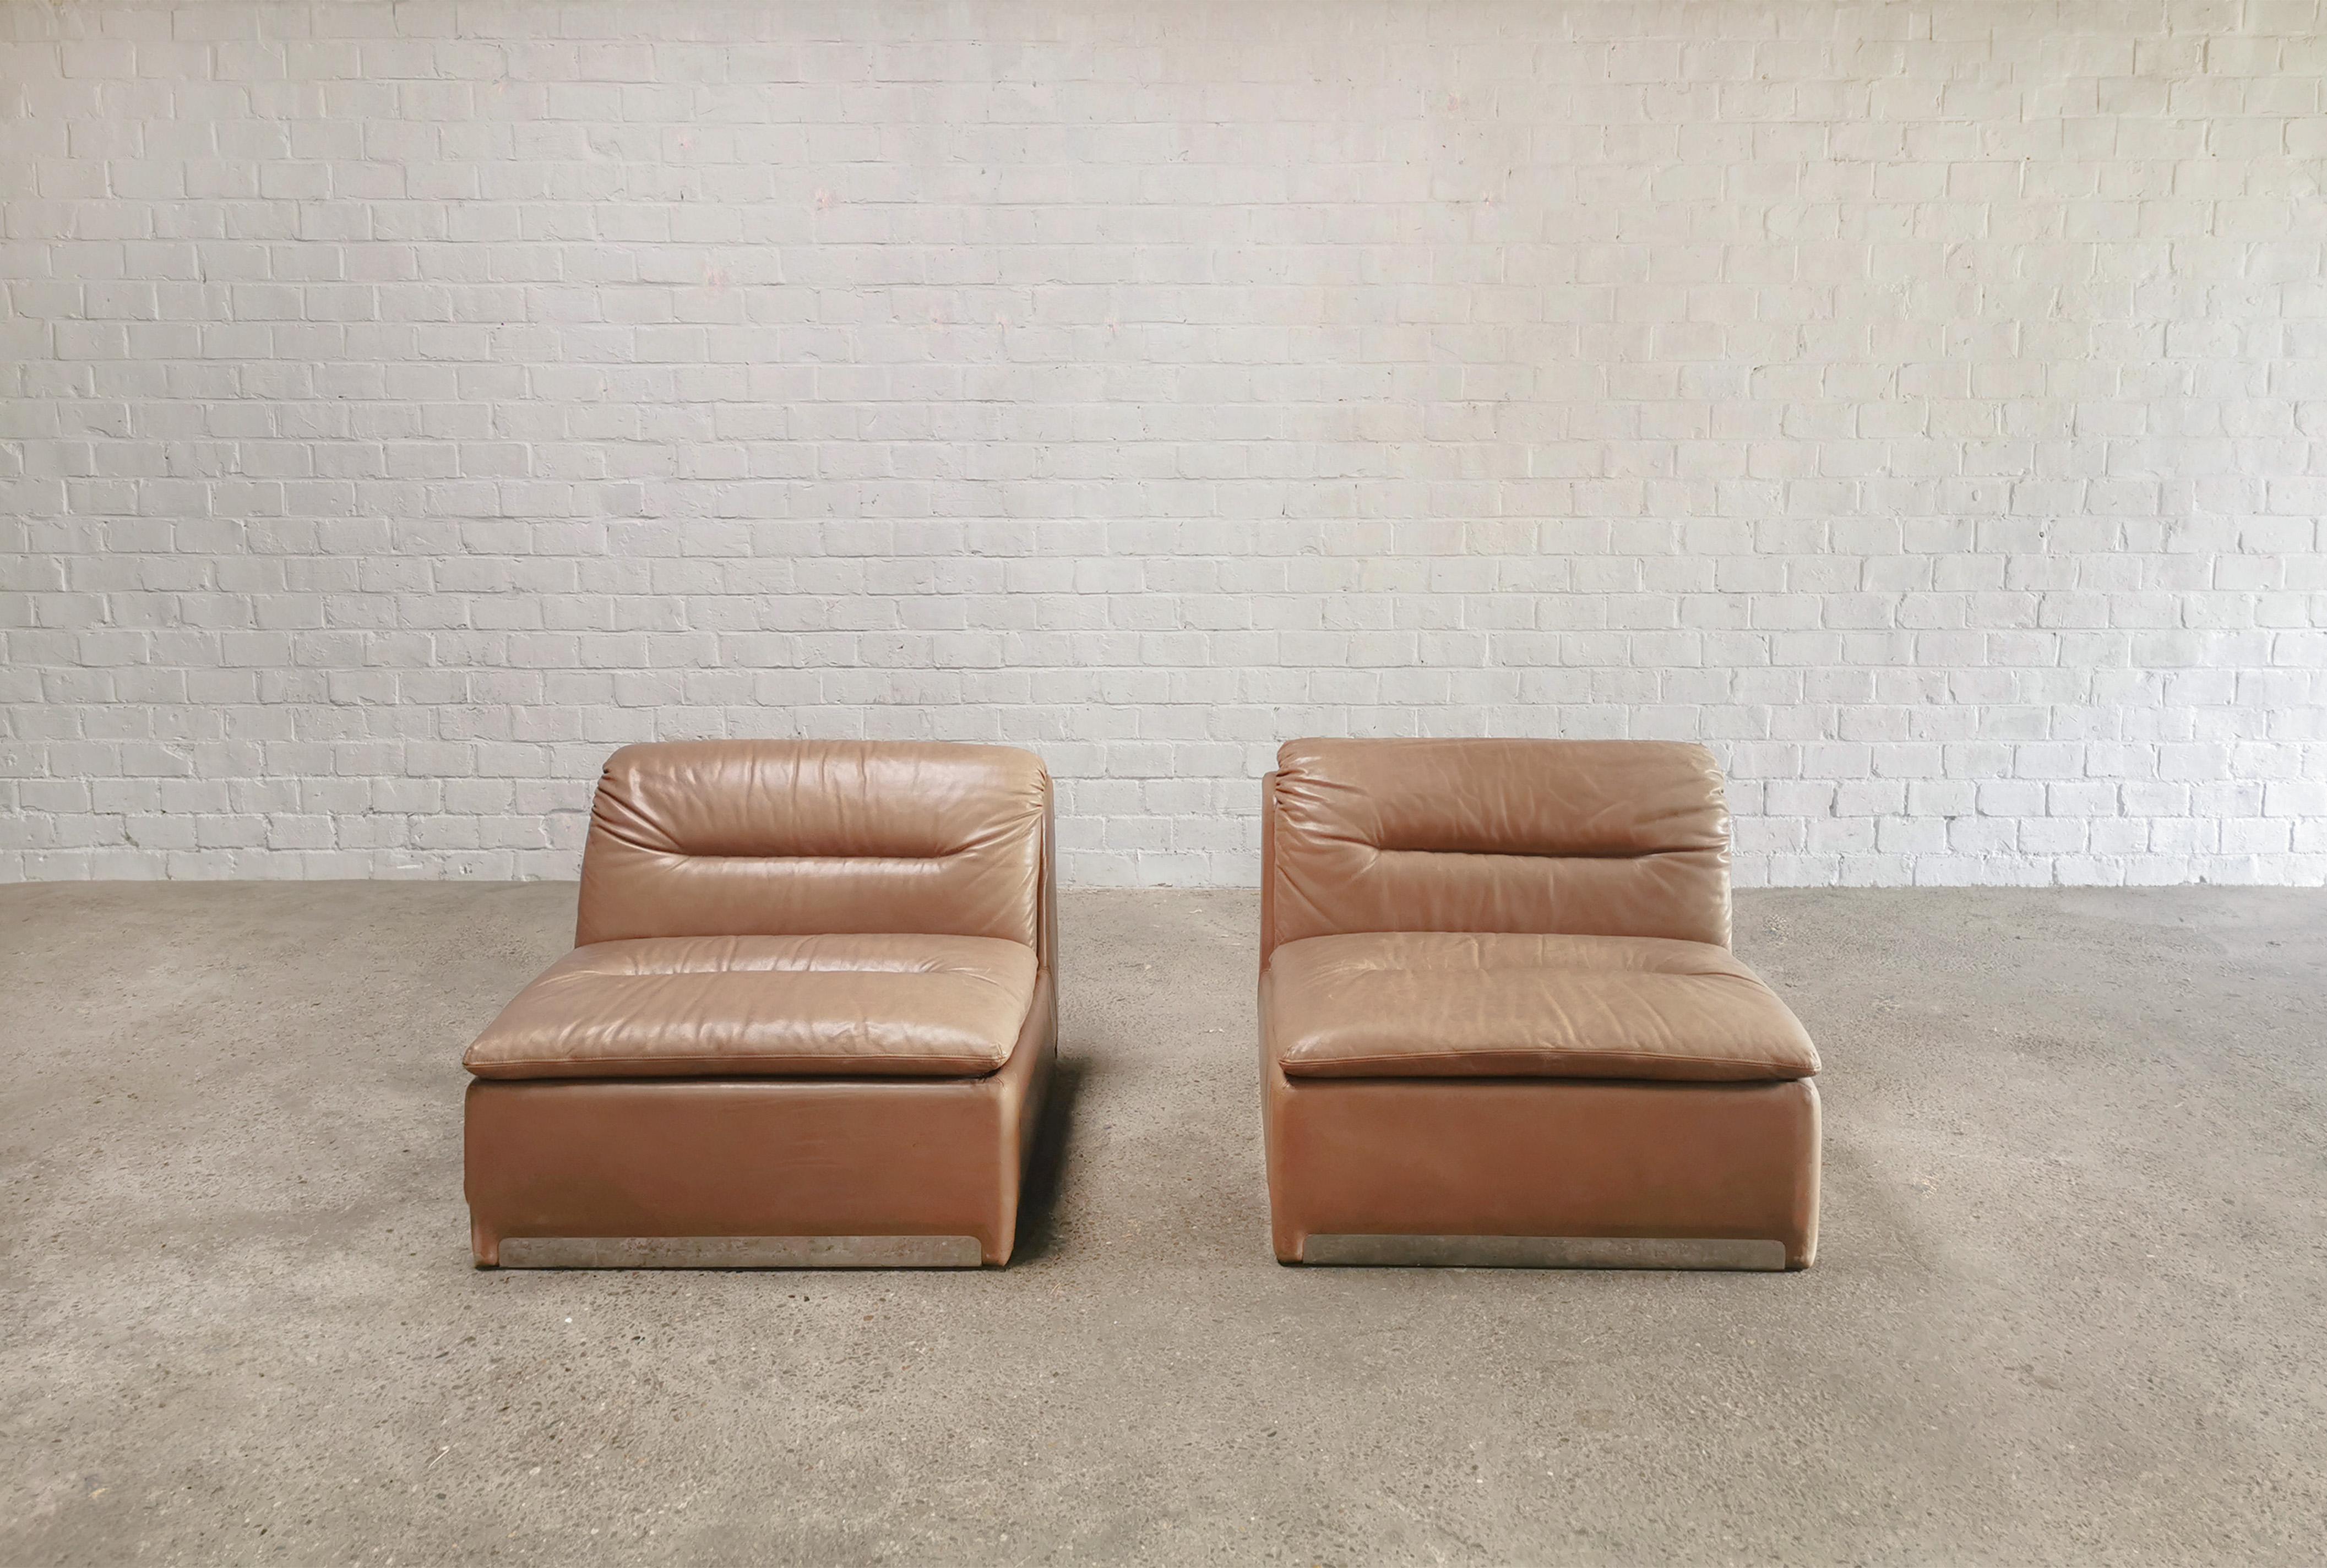 Saporiti Cognac Leather 'P10' Lounge Chairs, Italy 1970's In Good Condition For Sale In Zwijndrecht, Antwerp